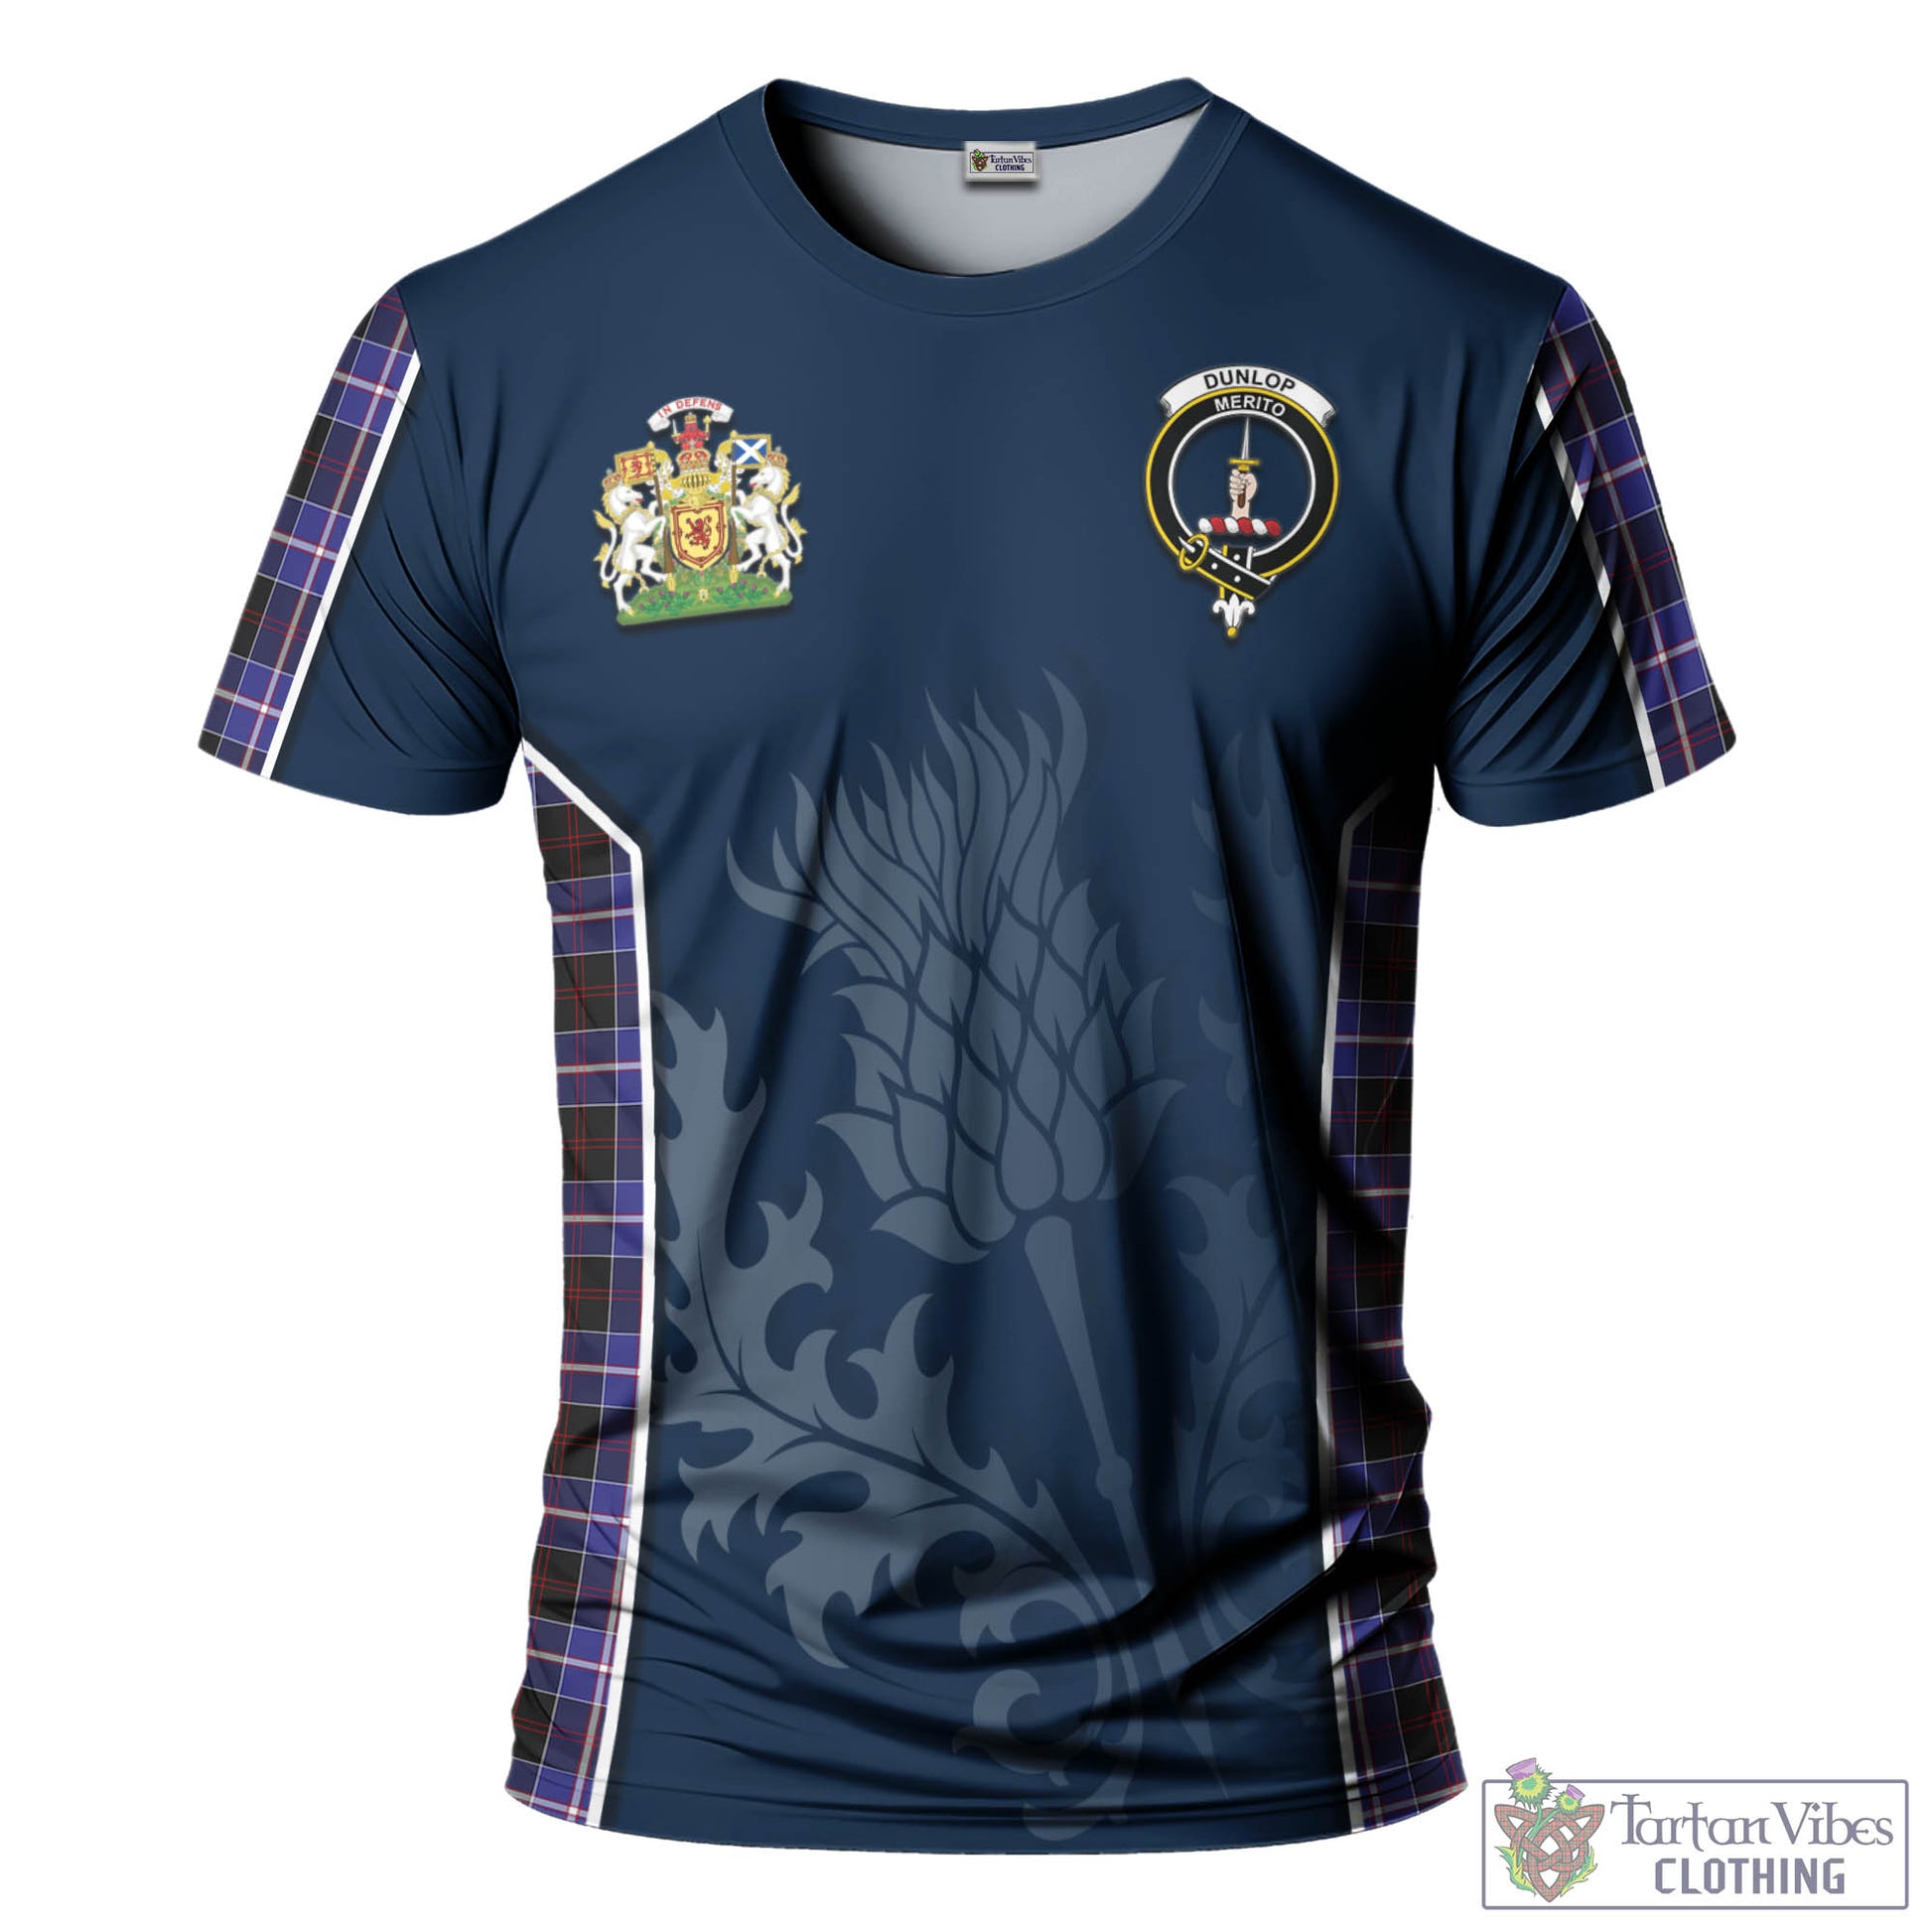 Tartan Vibes Clothing Dunlop Modern Tartan T-Shirt with Family Crest and Scottish Thistle Vibes Sport Style